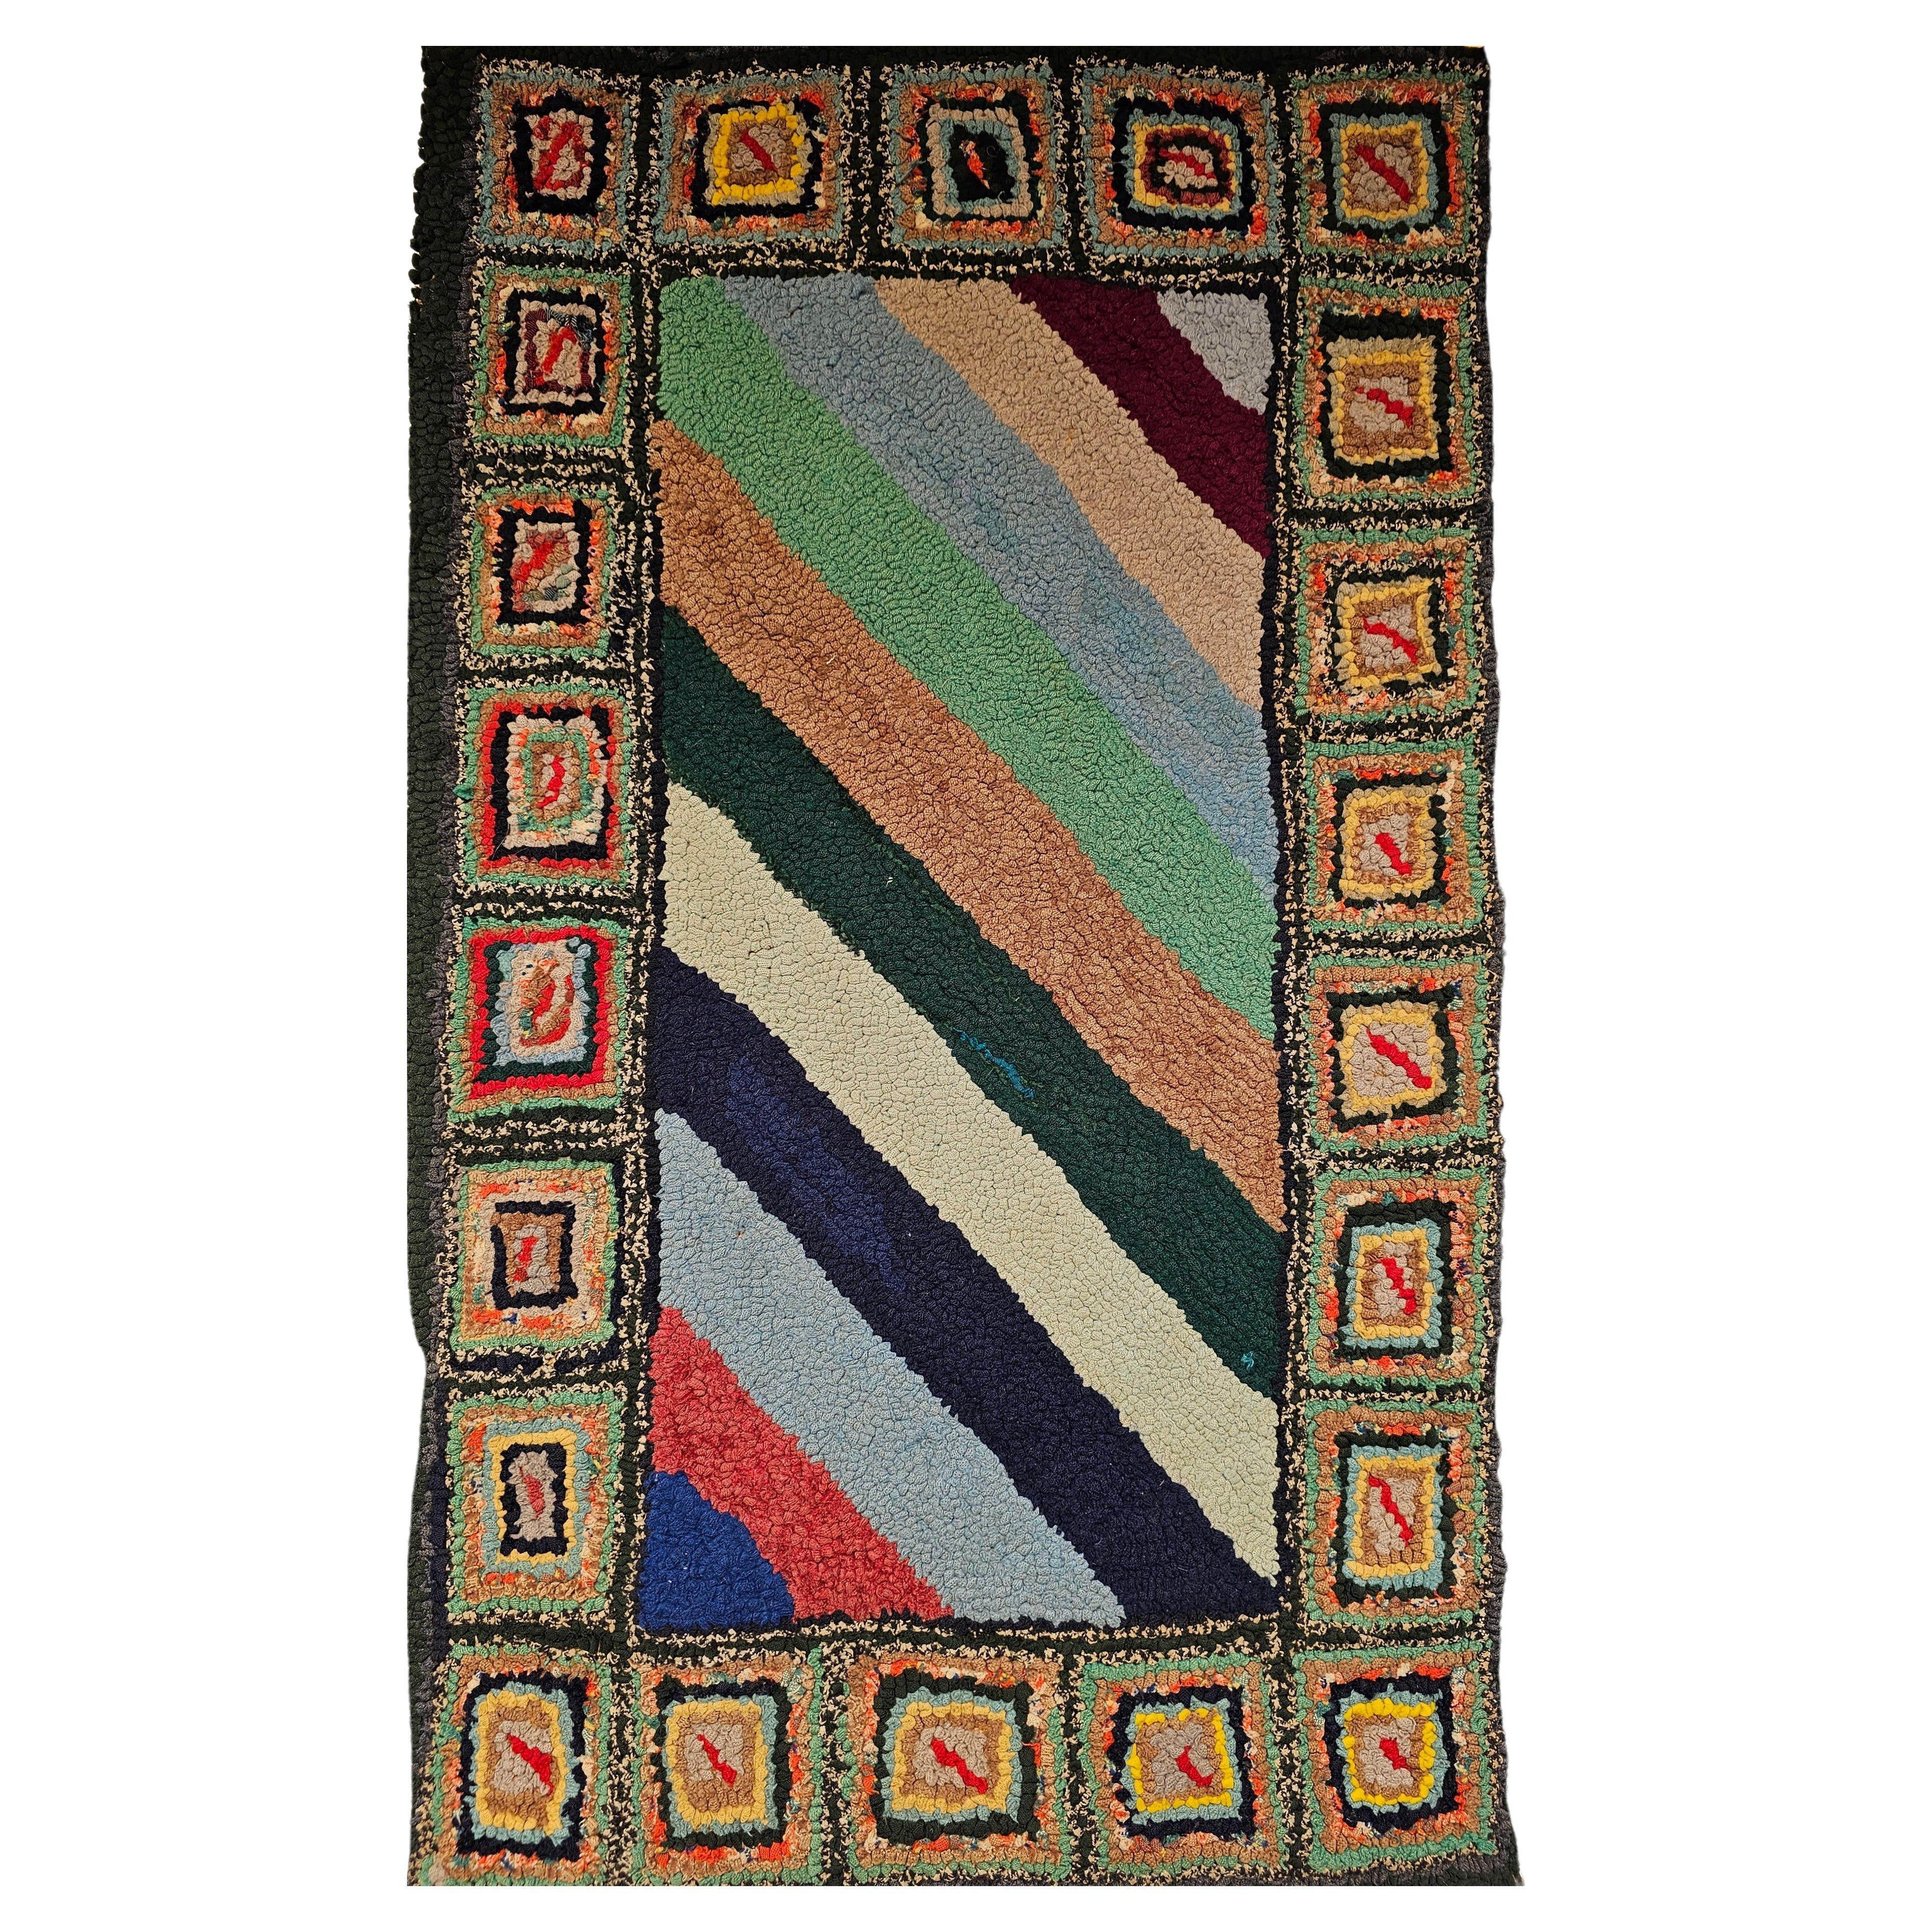 Vintage American Hand Hooked Rug with a Stripe Pattern as Tapestry Wall Art